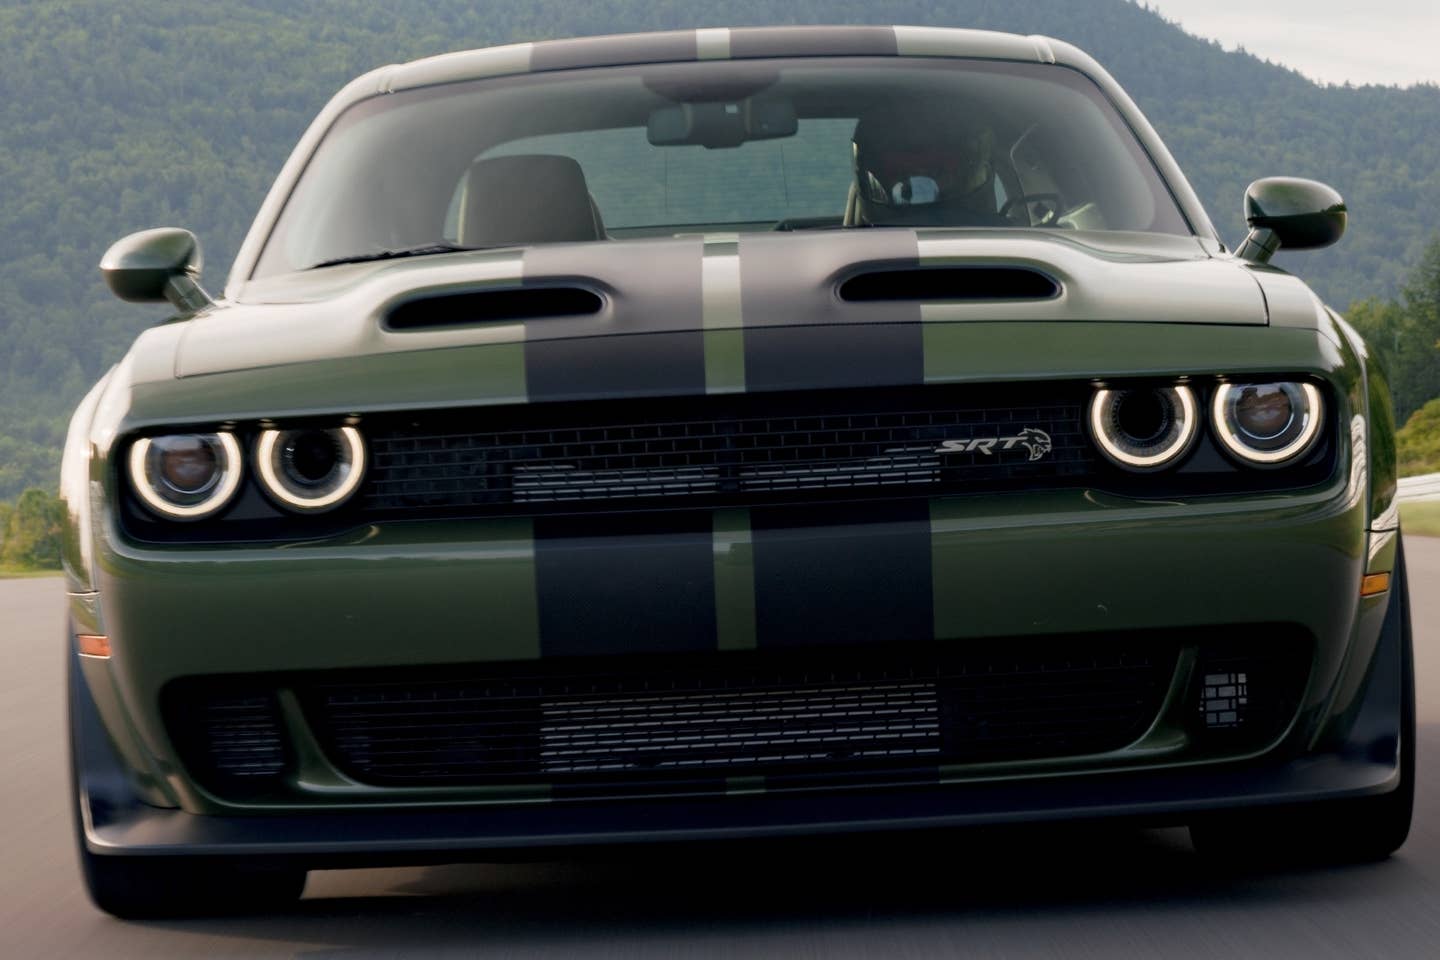 2023 Dodge Challenger SRT Hellcat Widebody in F8 Green with dual carbon stripes